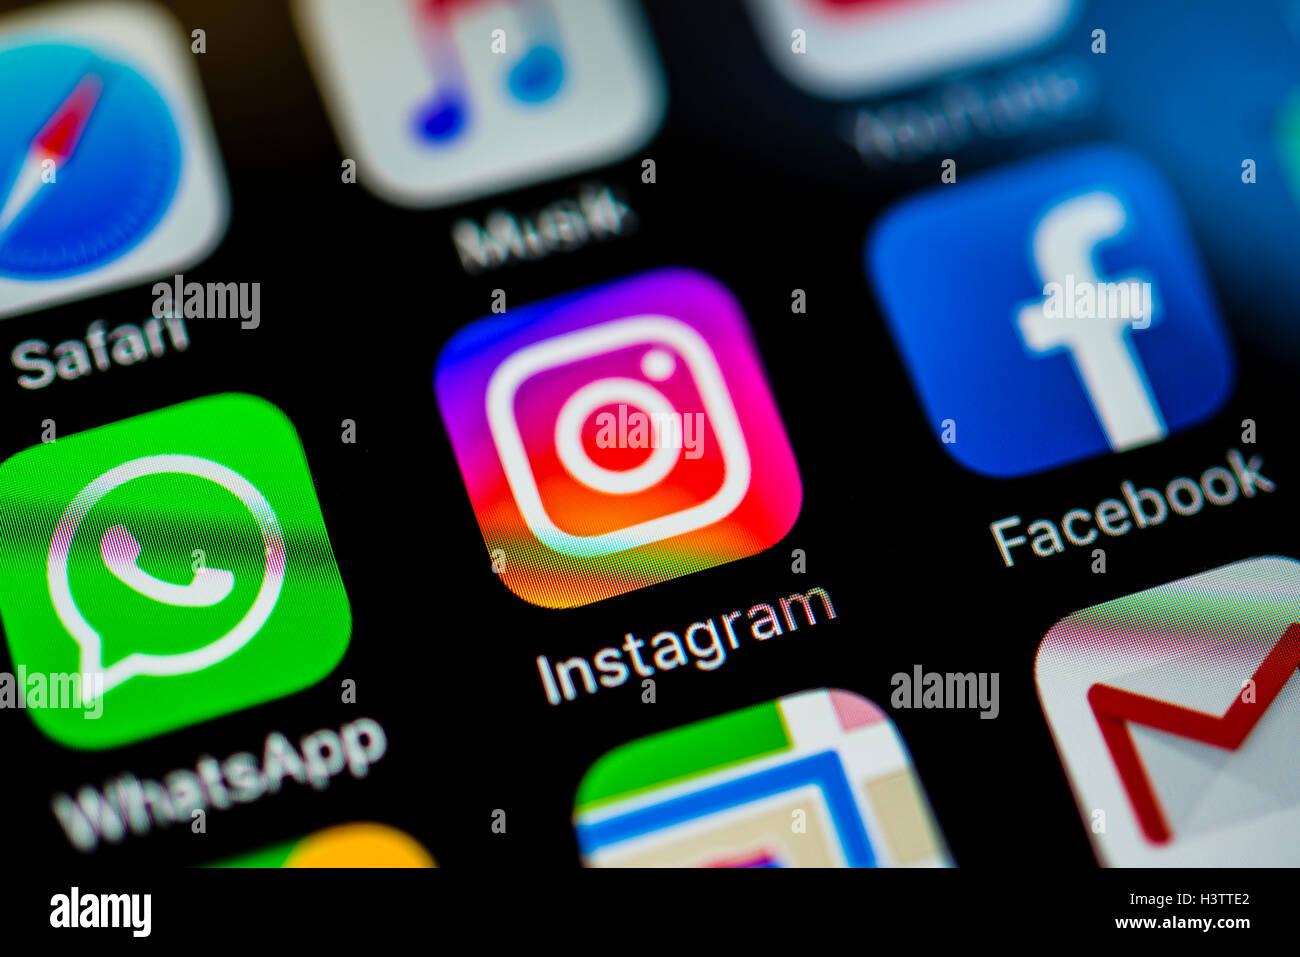 Smartphone screen with WhatsApp, Instagram and Facebook app icons in detail Stock Photo